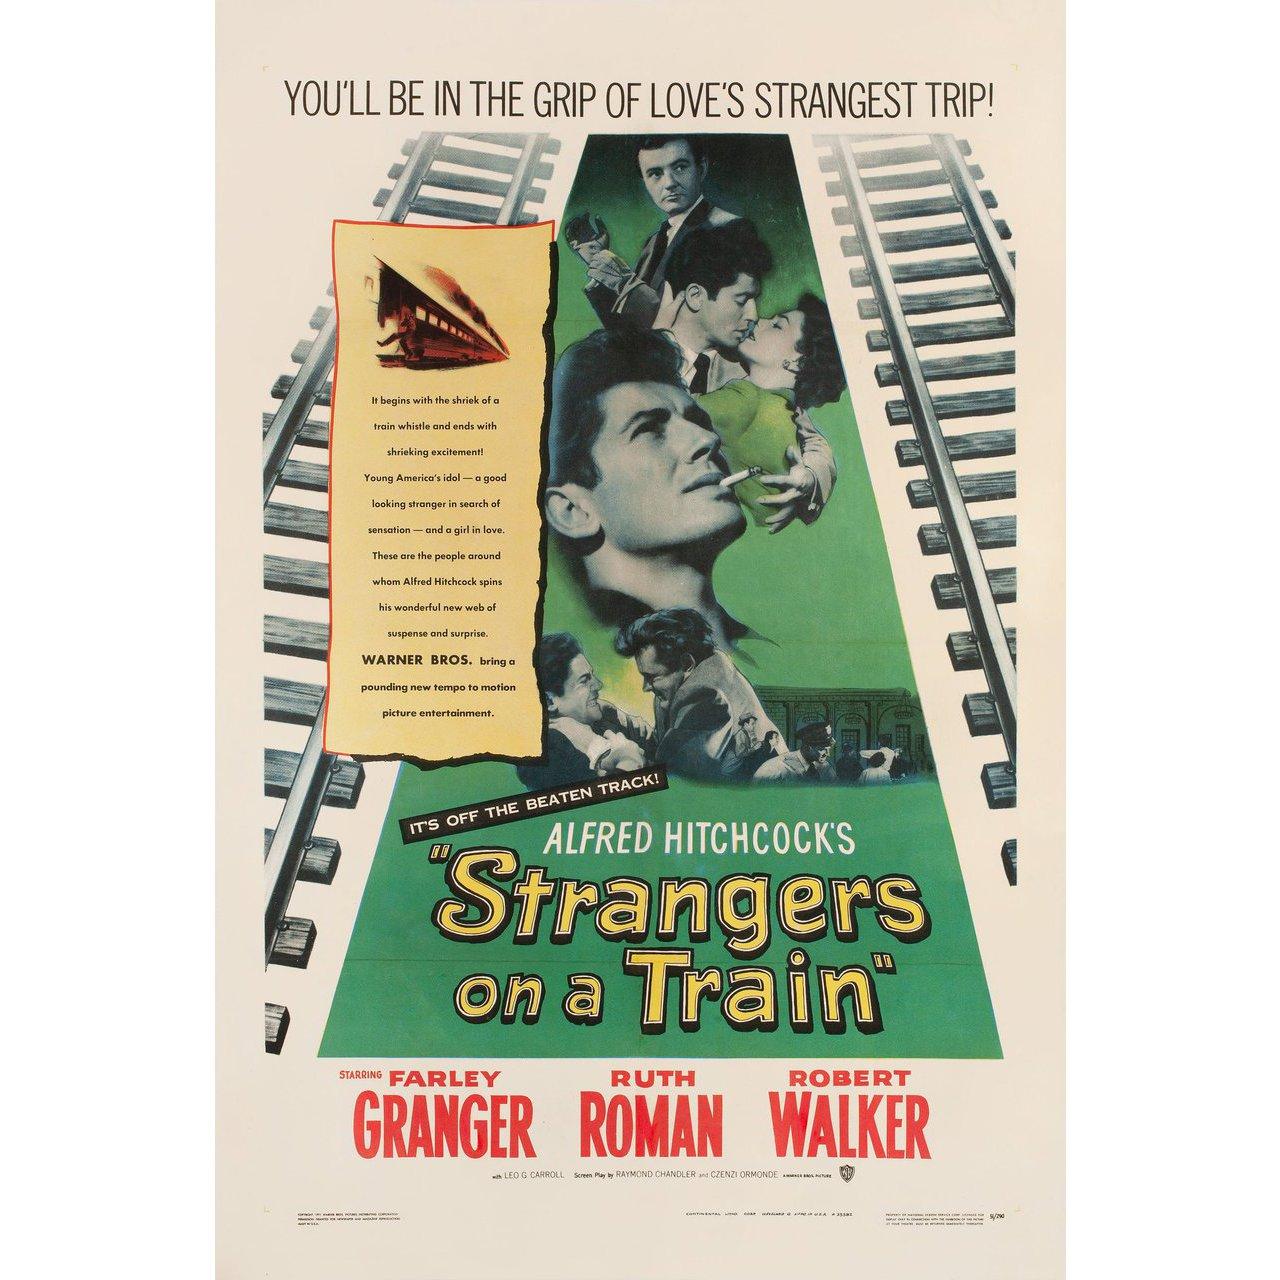 Original 1951 U.S. one sheet poster for the film Strangers on a Train directed by Alfred Hitchcock with Farley Granger / Ruth Roman / Robert Walker / Leo G. Carroll. Fine condition, linen-backed. This poster has been professionally linen-backed.